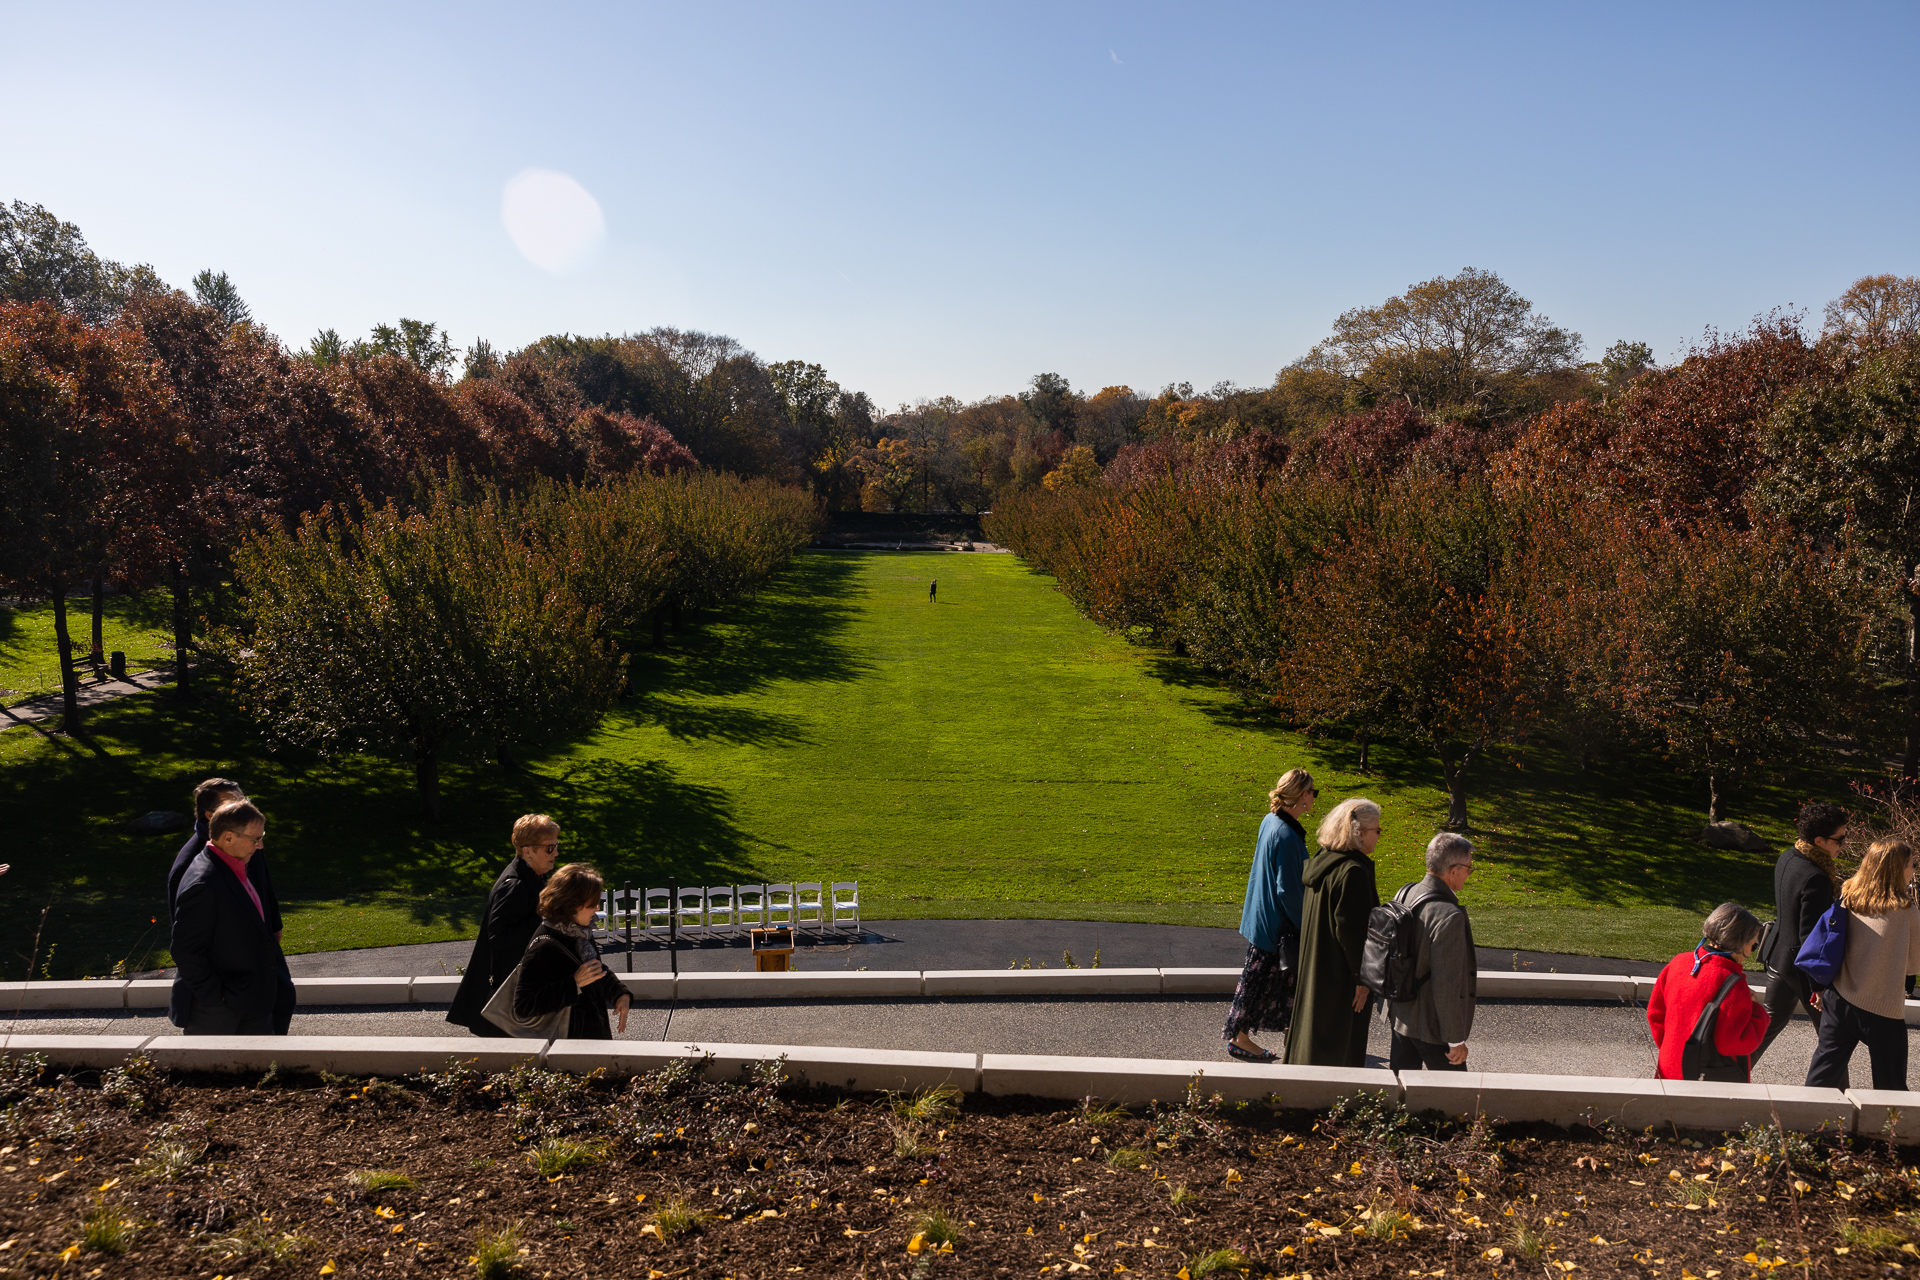 The overlook's pathway brings visitors from the upper portion of Brooklyn Botanic Garden down to the Cherry Esplanade. Eagle photo by Paul Frangipane 